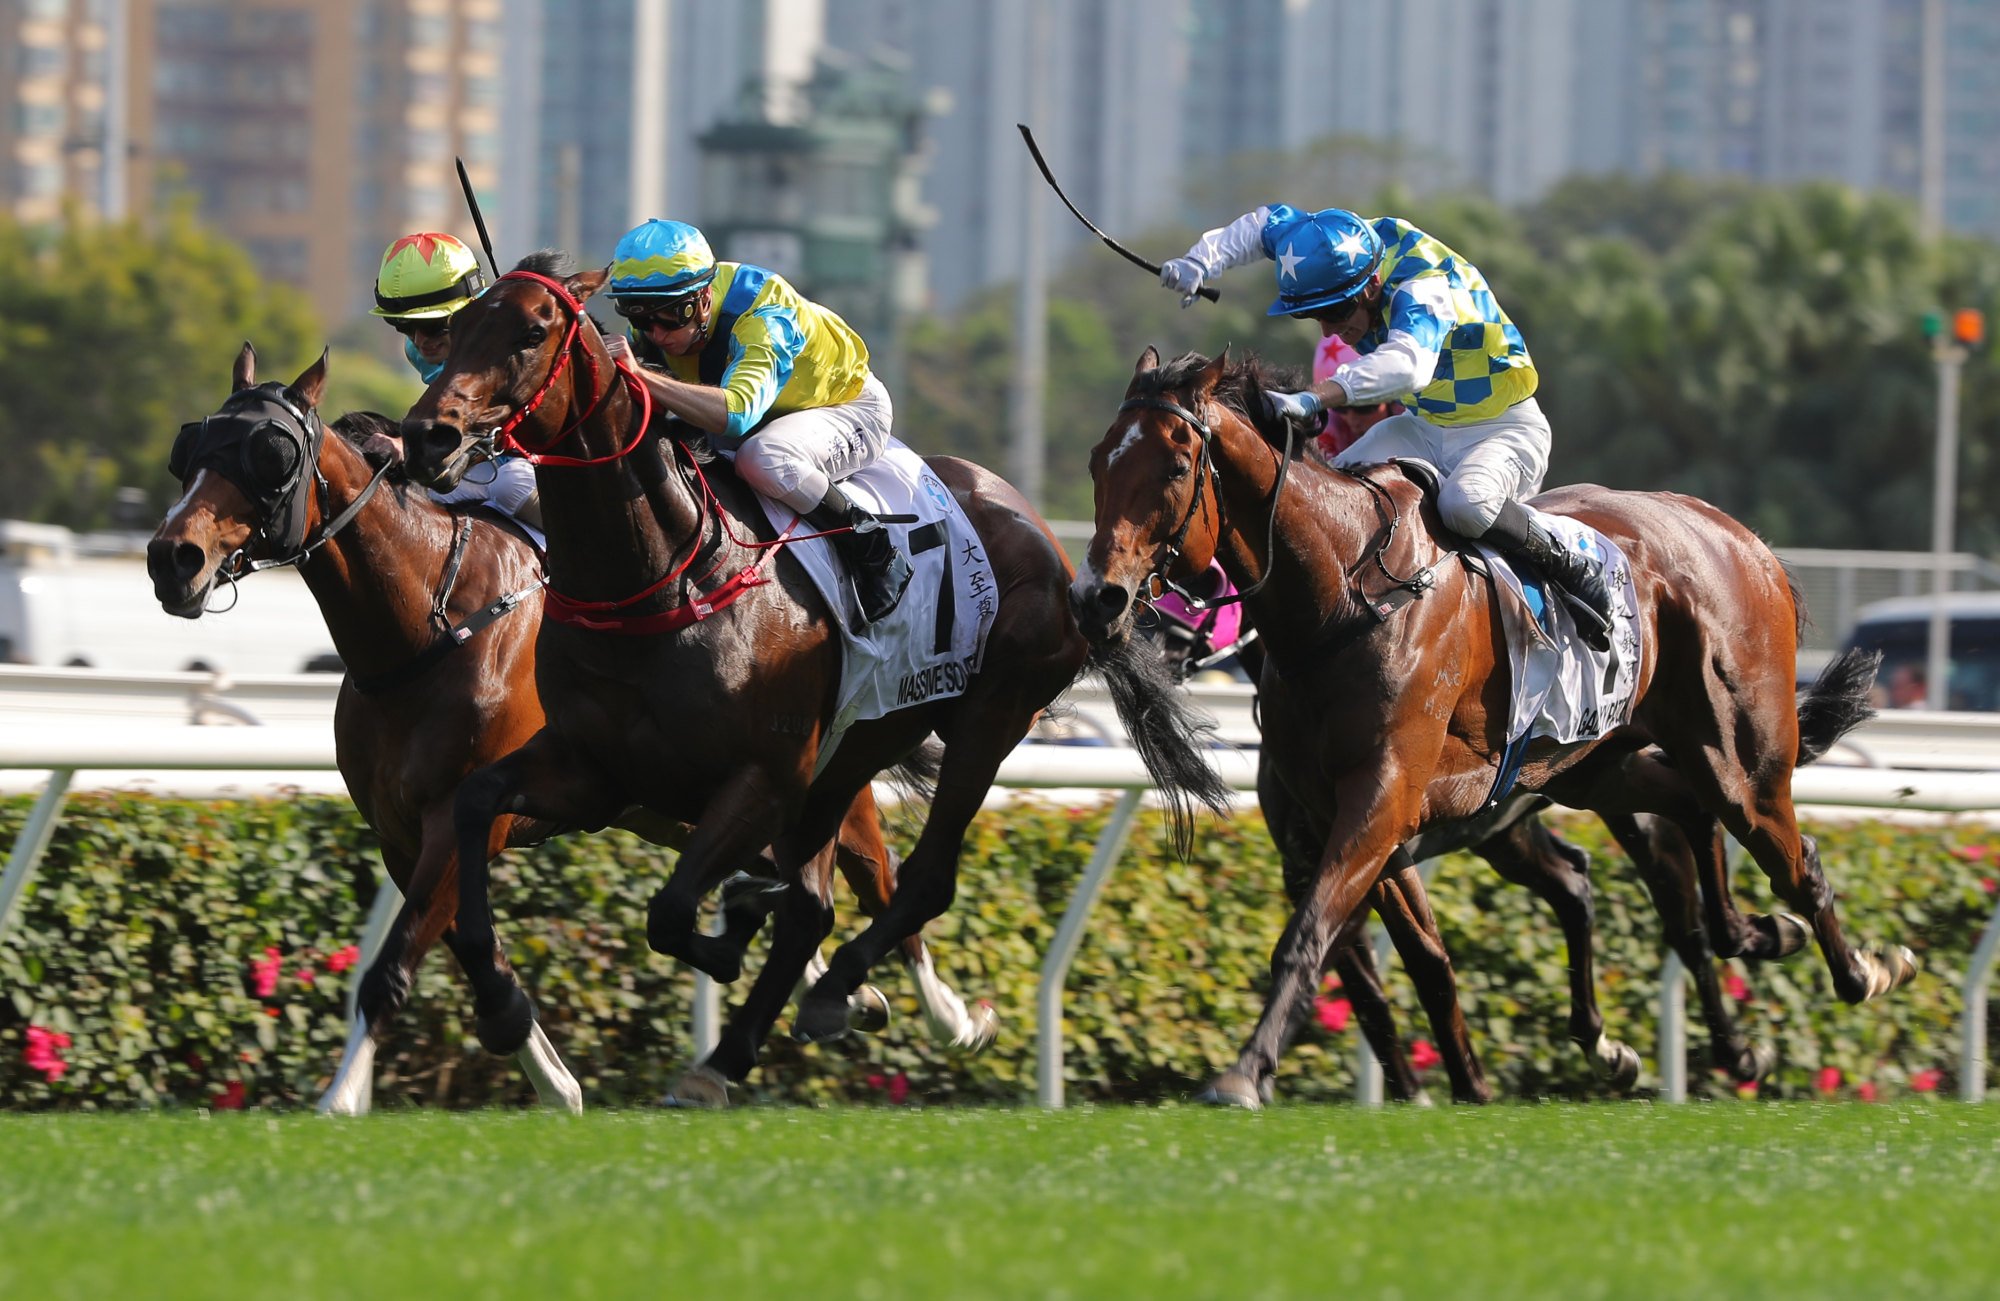 Galaxy Patch (right) finishes second under Blake Shinn in the Hong Kong Derby (2,000m).